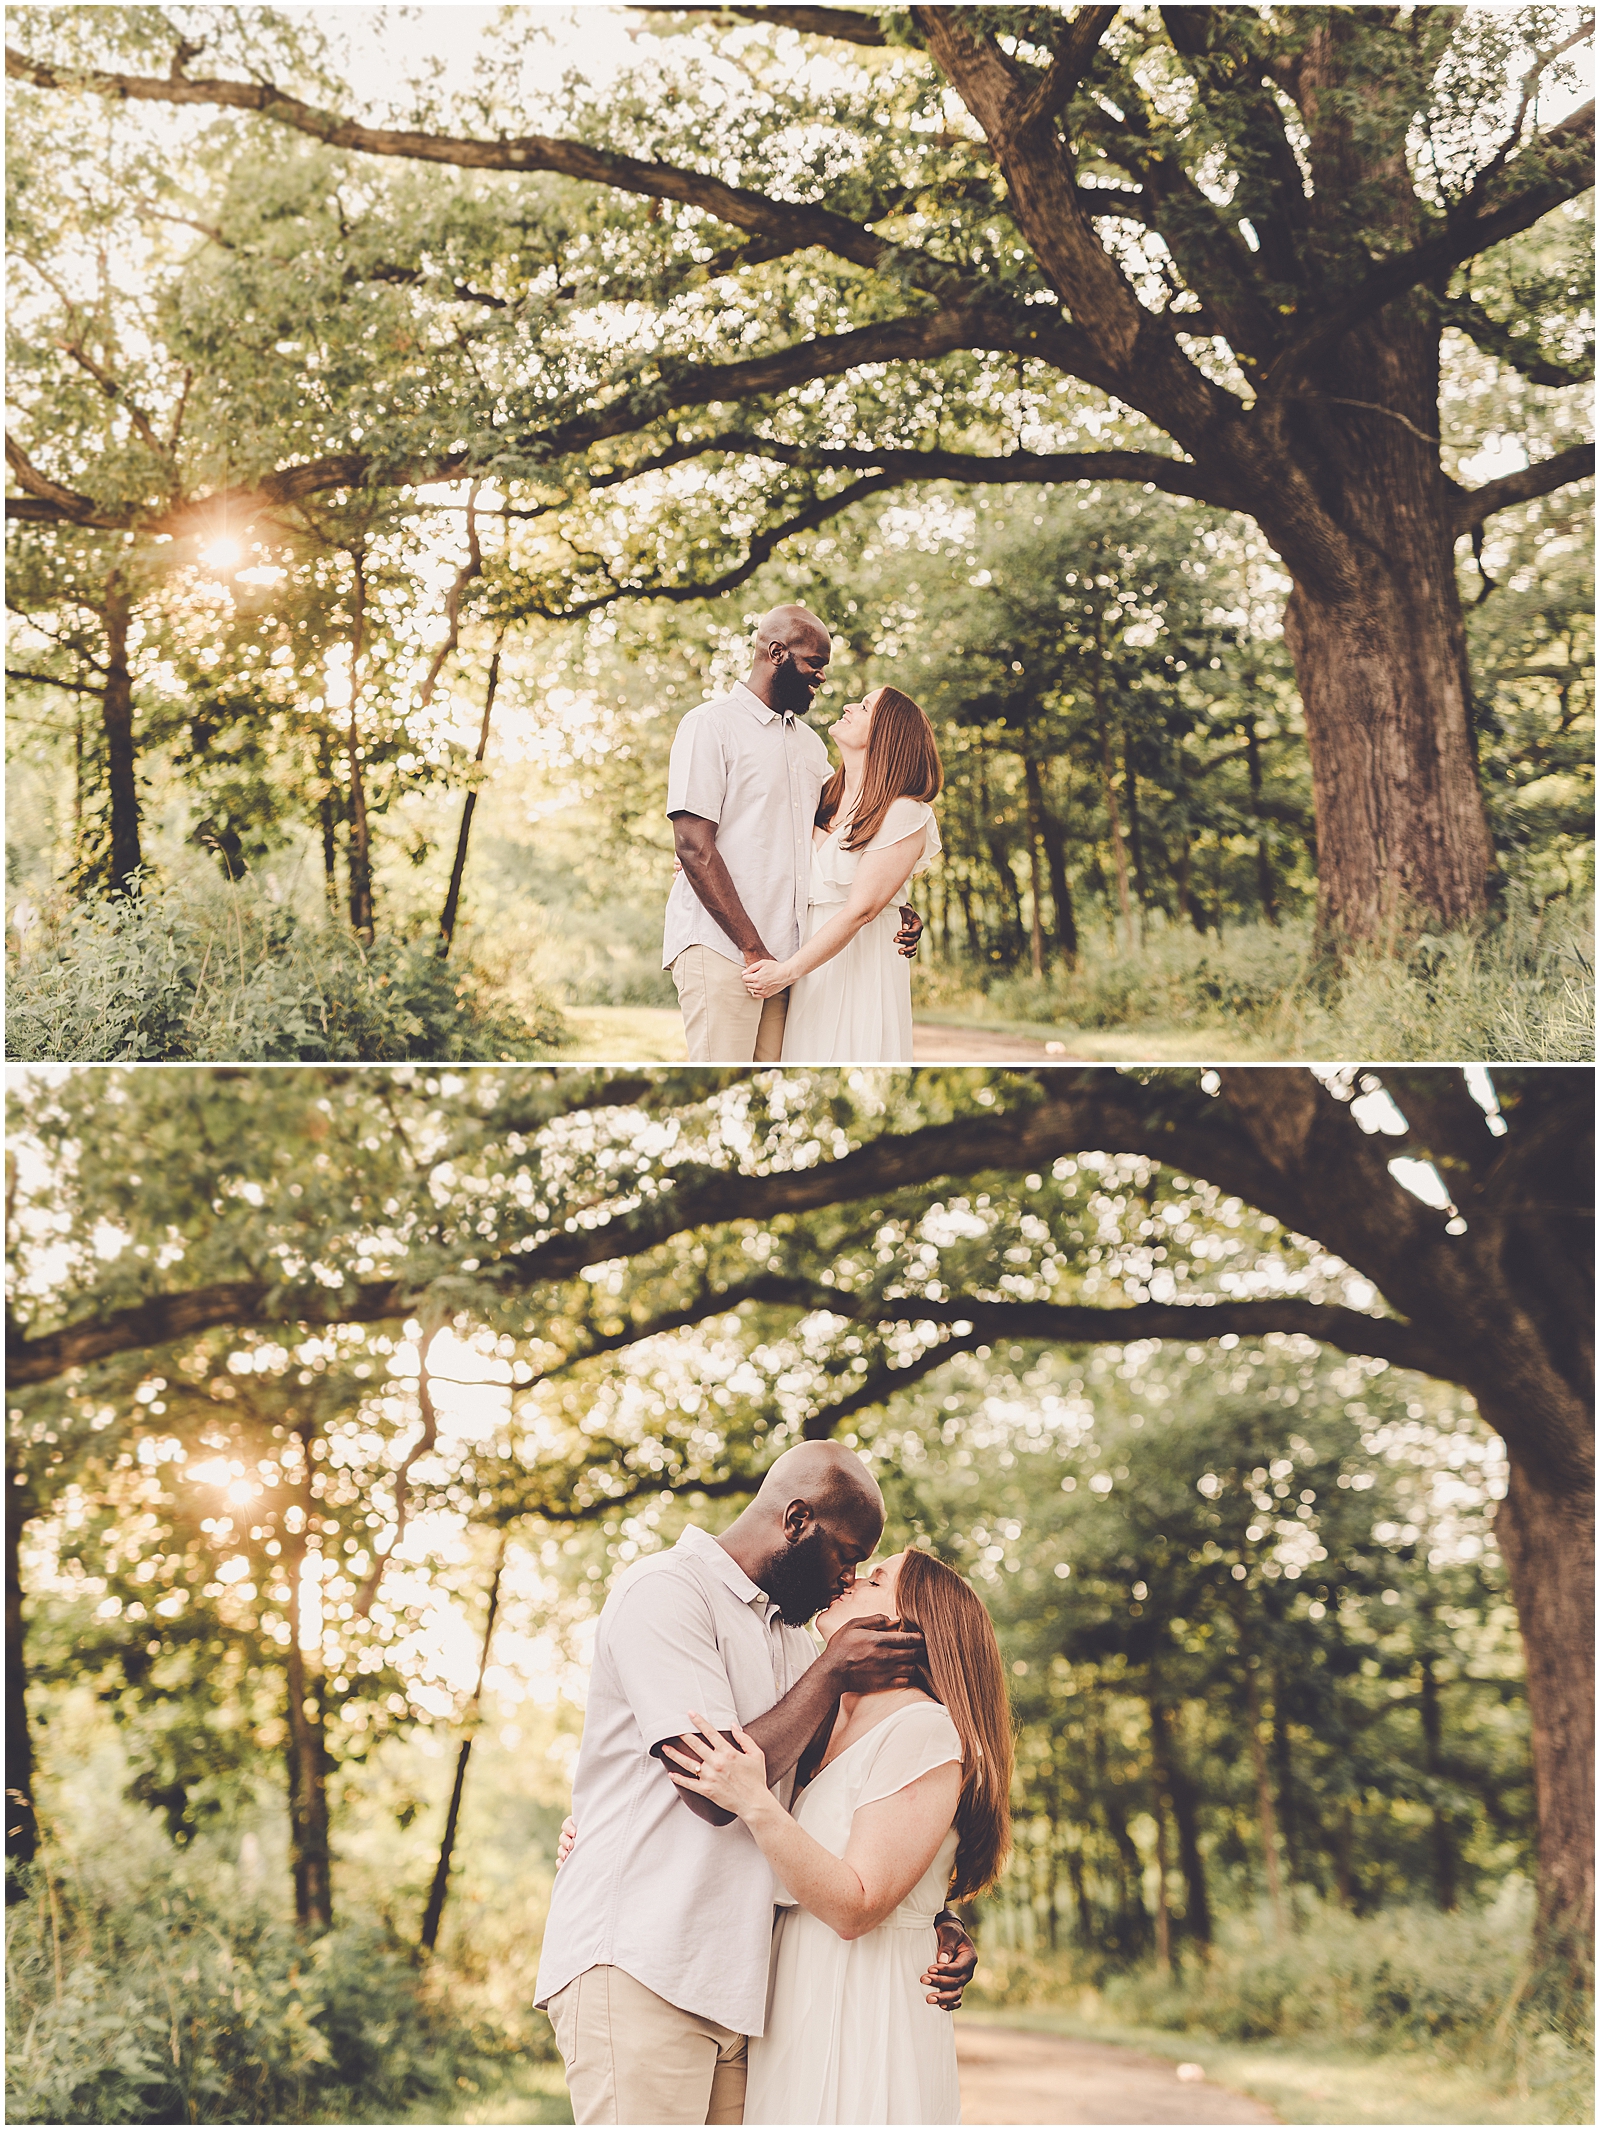 Emma and JeMarcus's engagement photos at Hickory Creek in Mokena with Chicagoland wedding photographer Kara Evans Photographer.